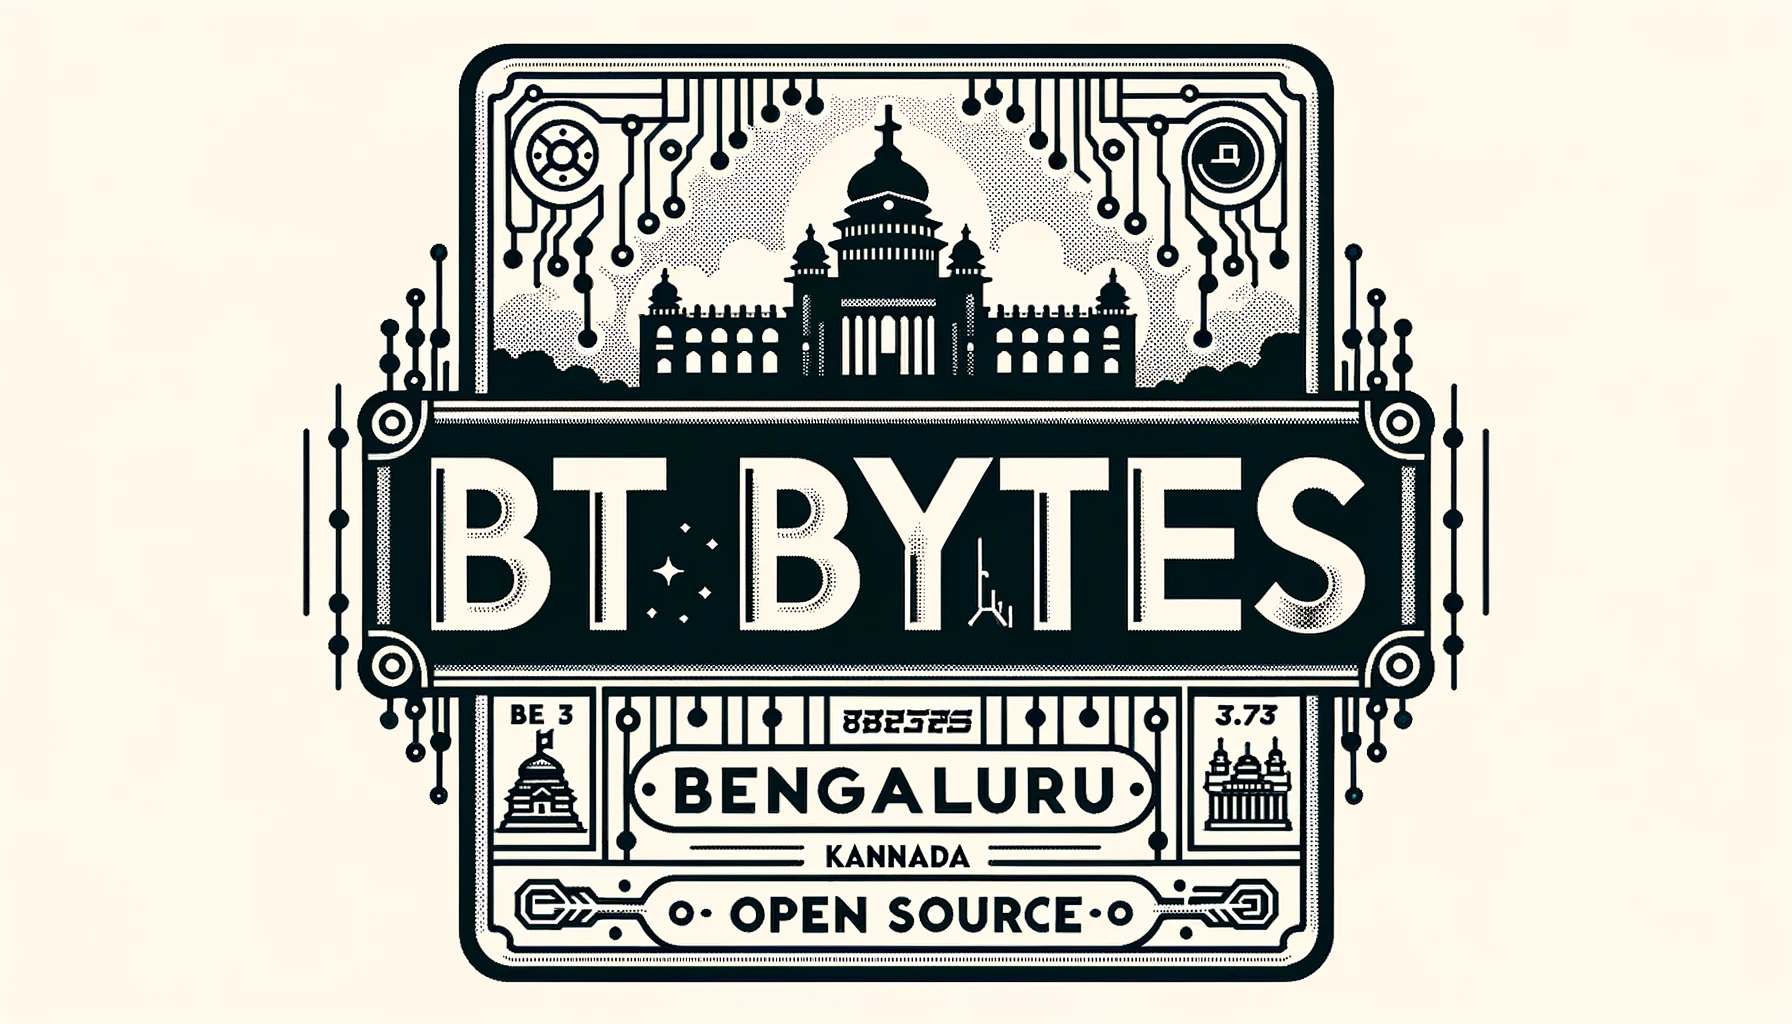 BBMP releases logo ahead of Brand Bengaluru Conclave